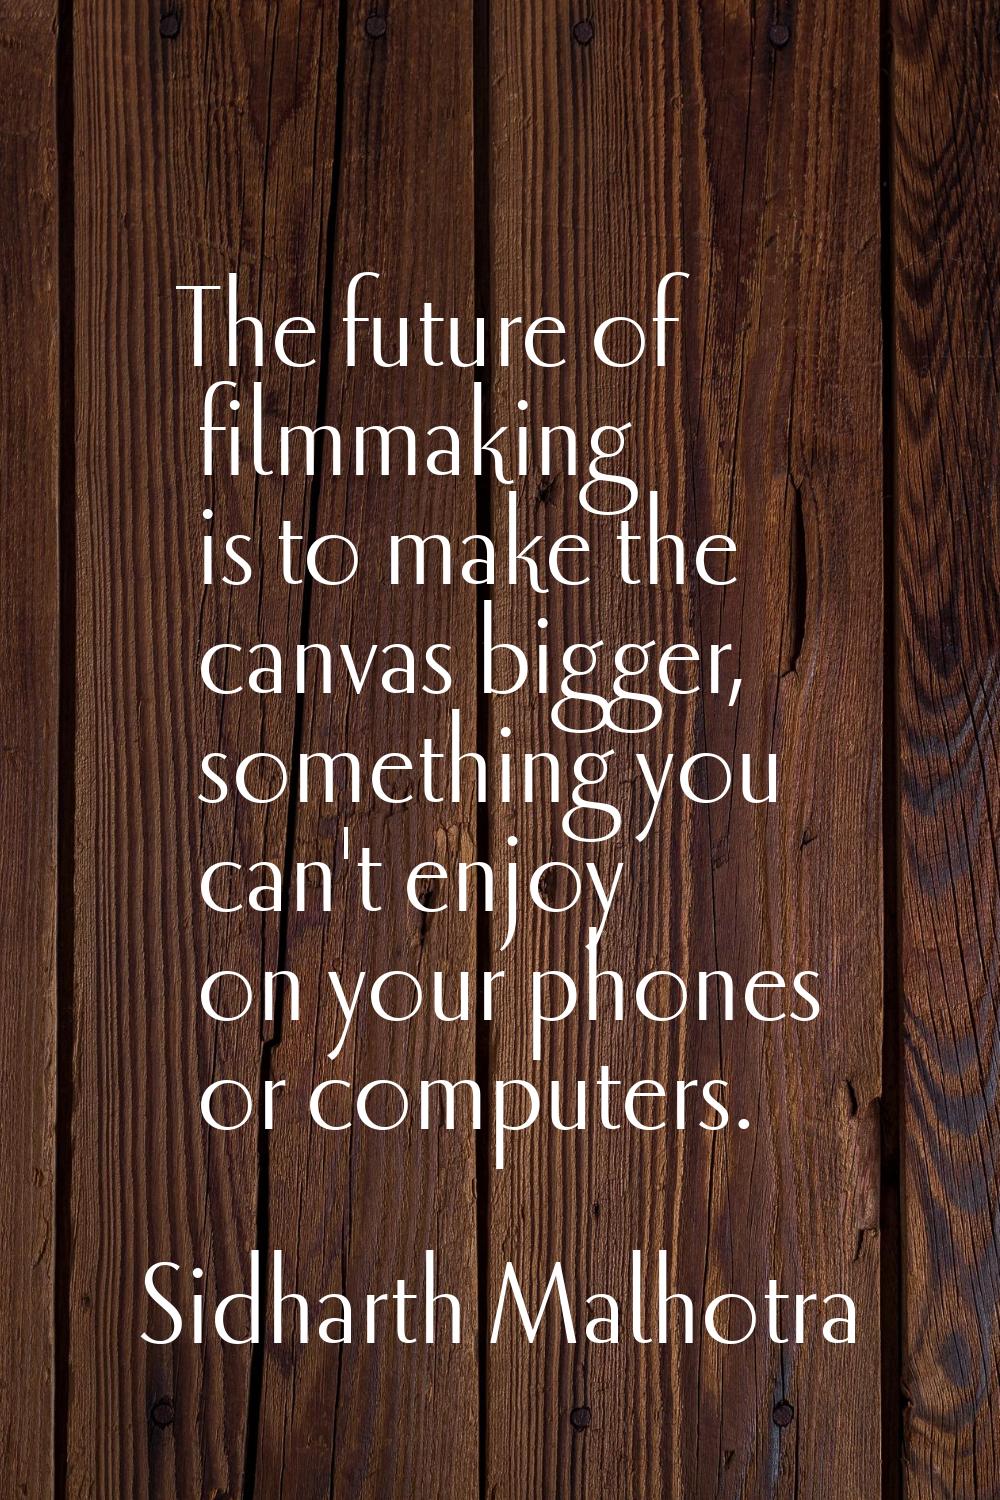 The future of filmmaking is to make the canvas bigger, something you can't enjoy on your phones or 